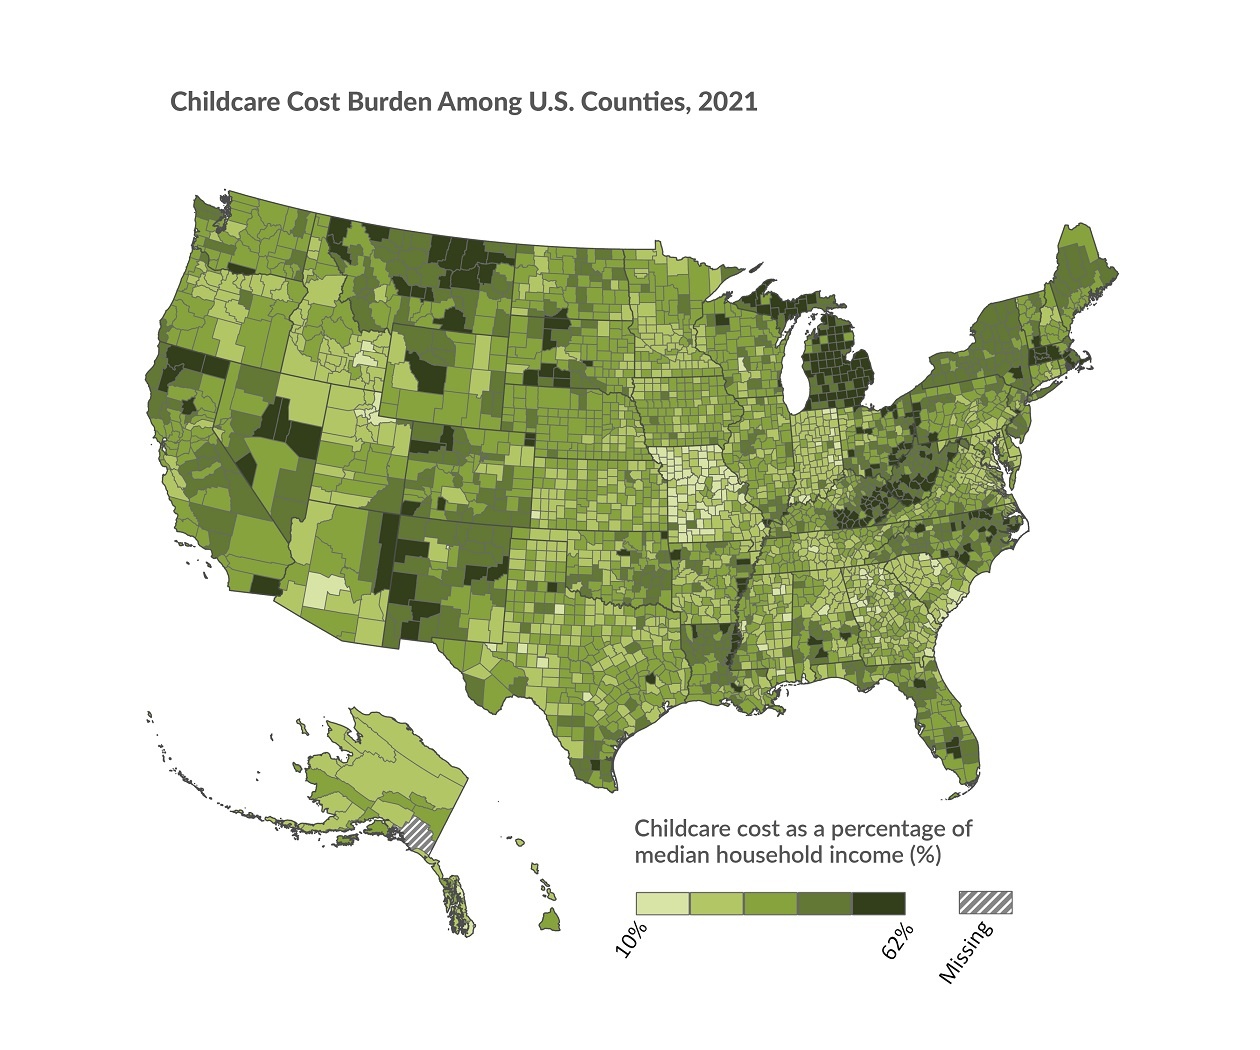 Map of the United States showing the childcare cost burden as a percentage of median household income among counties in 2021